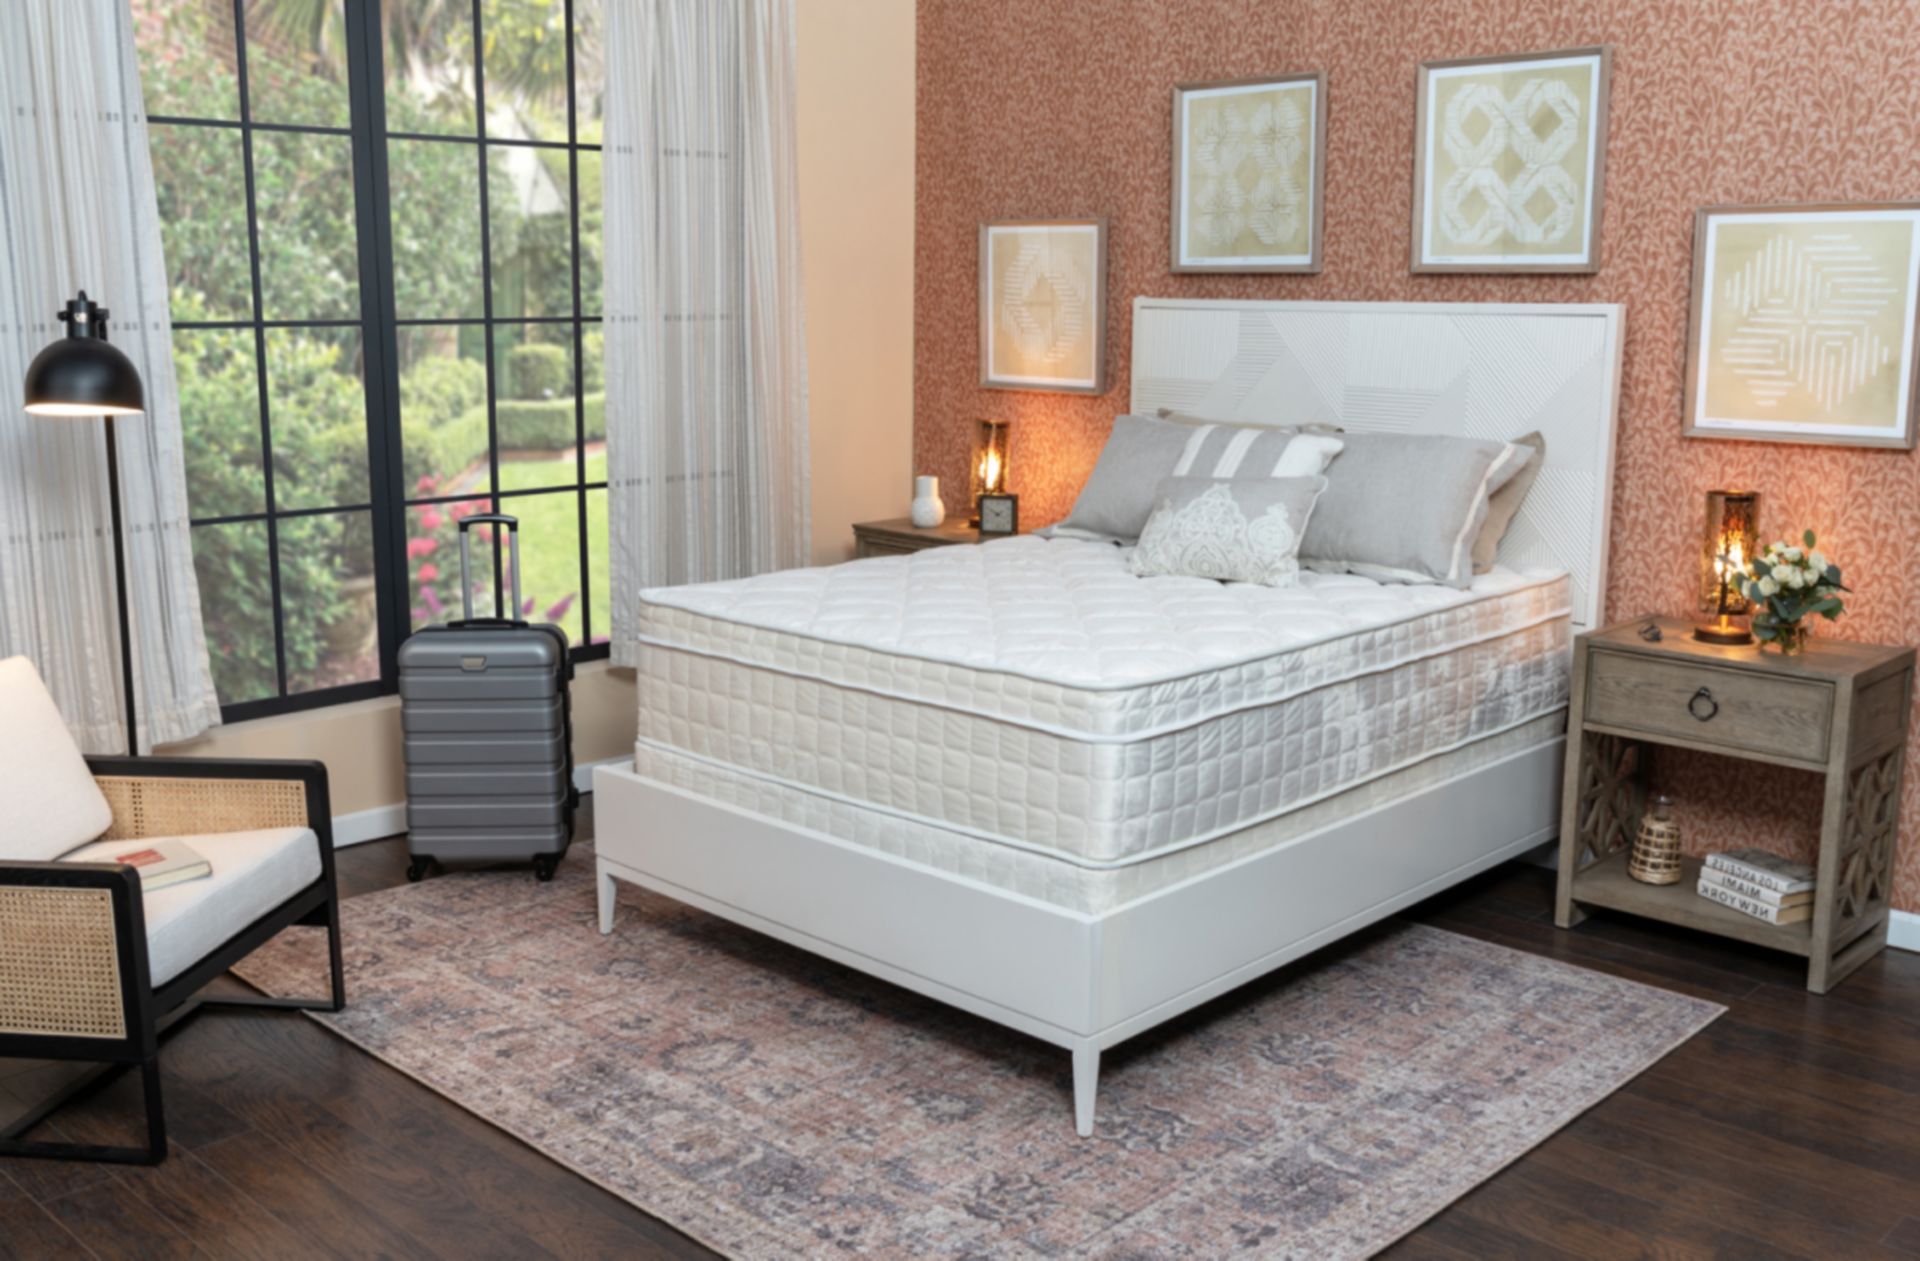 Platinum mattress from our Luxury Line pictured in a boutique hotel room